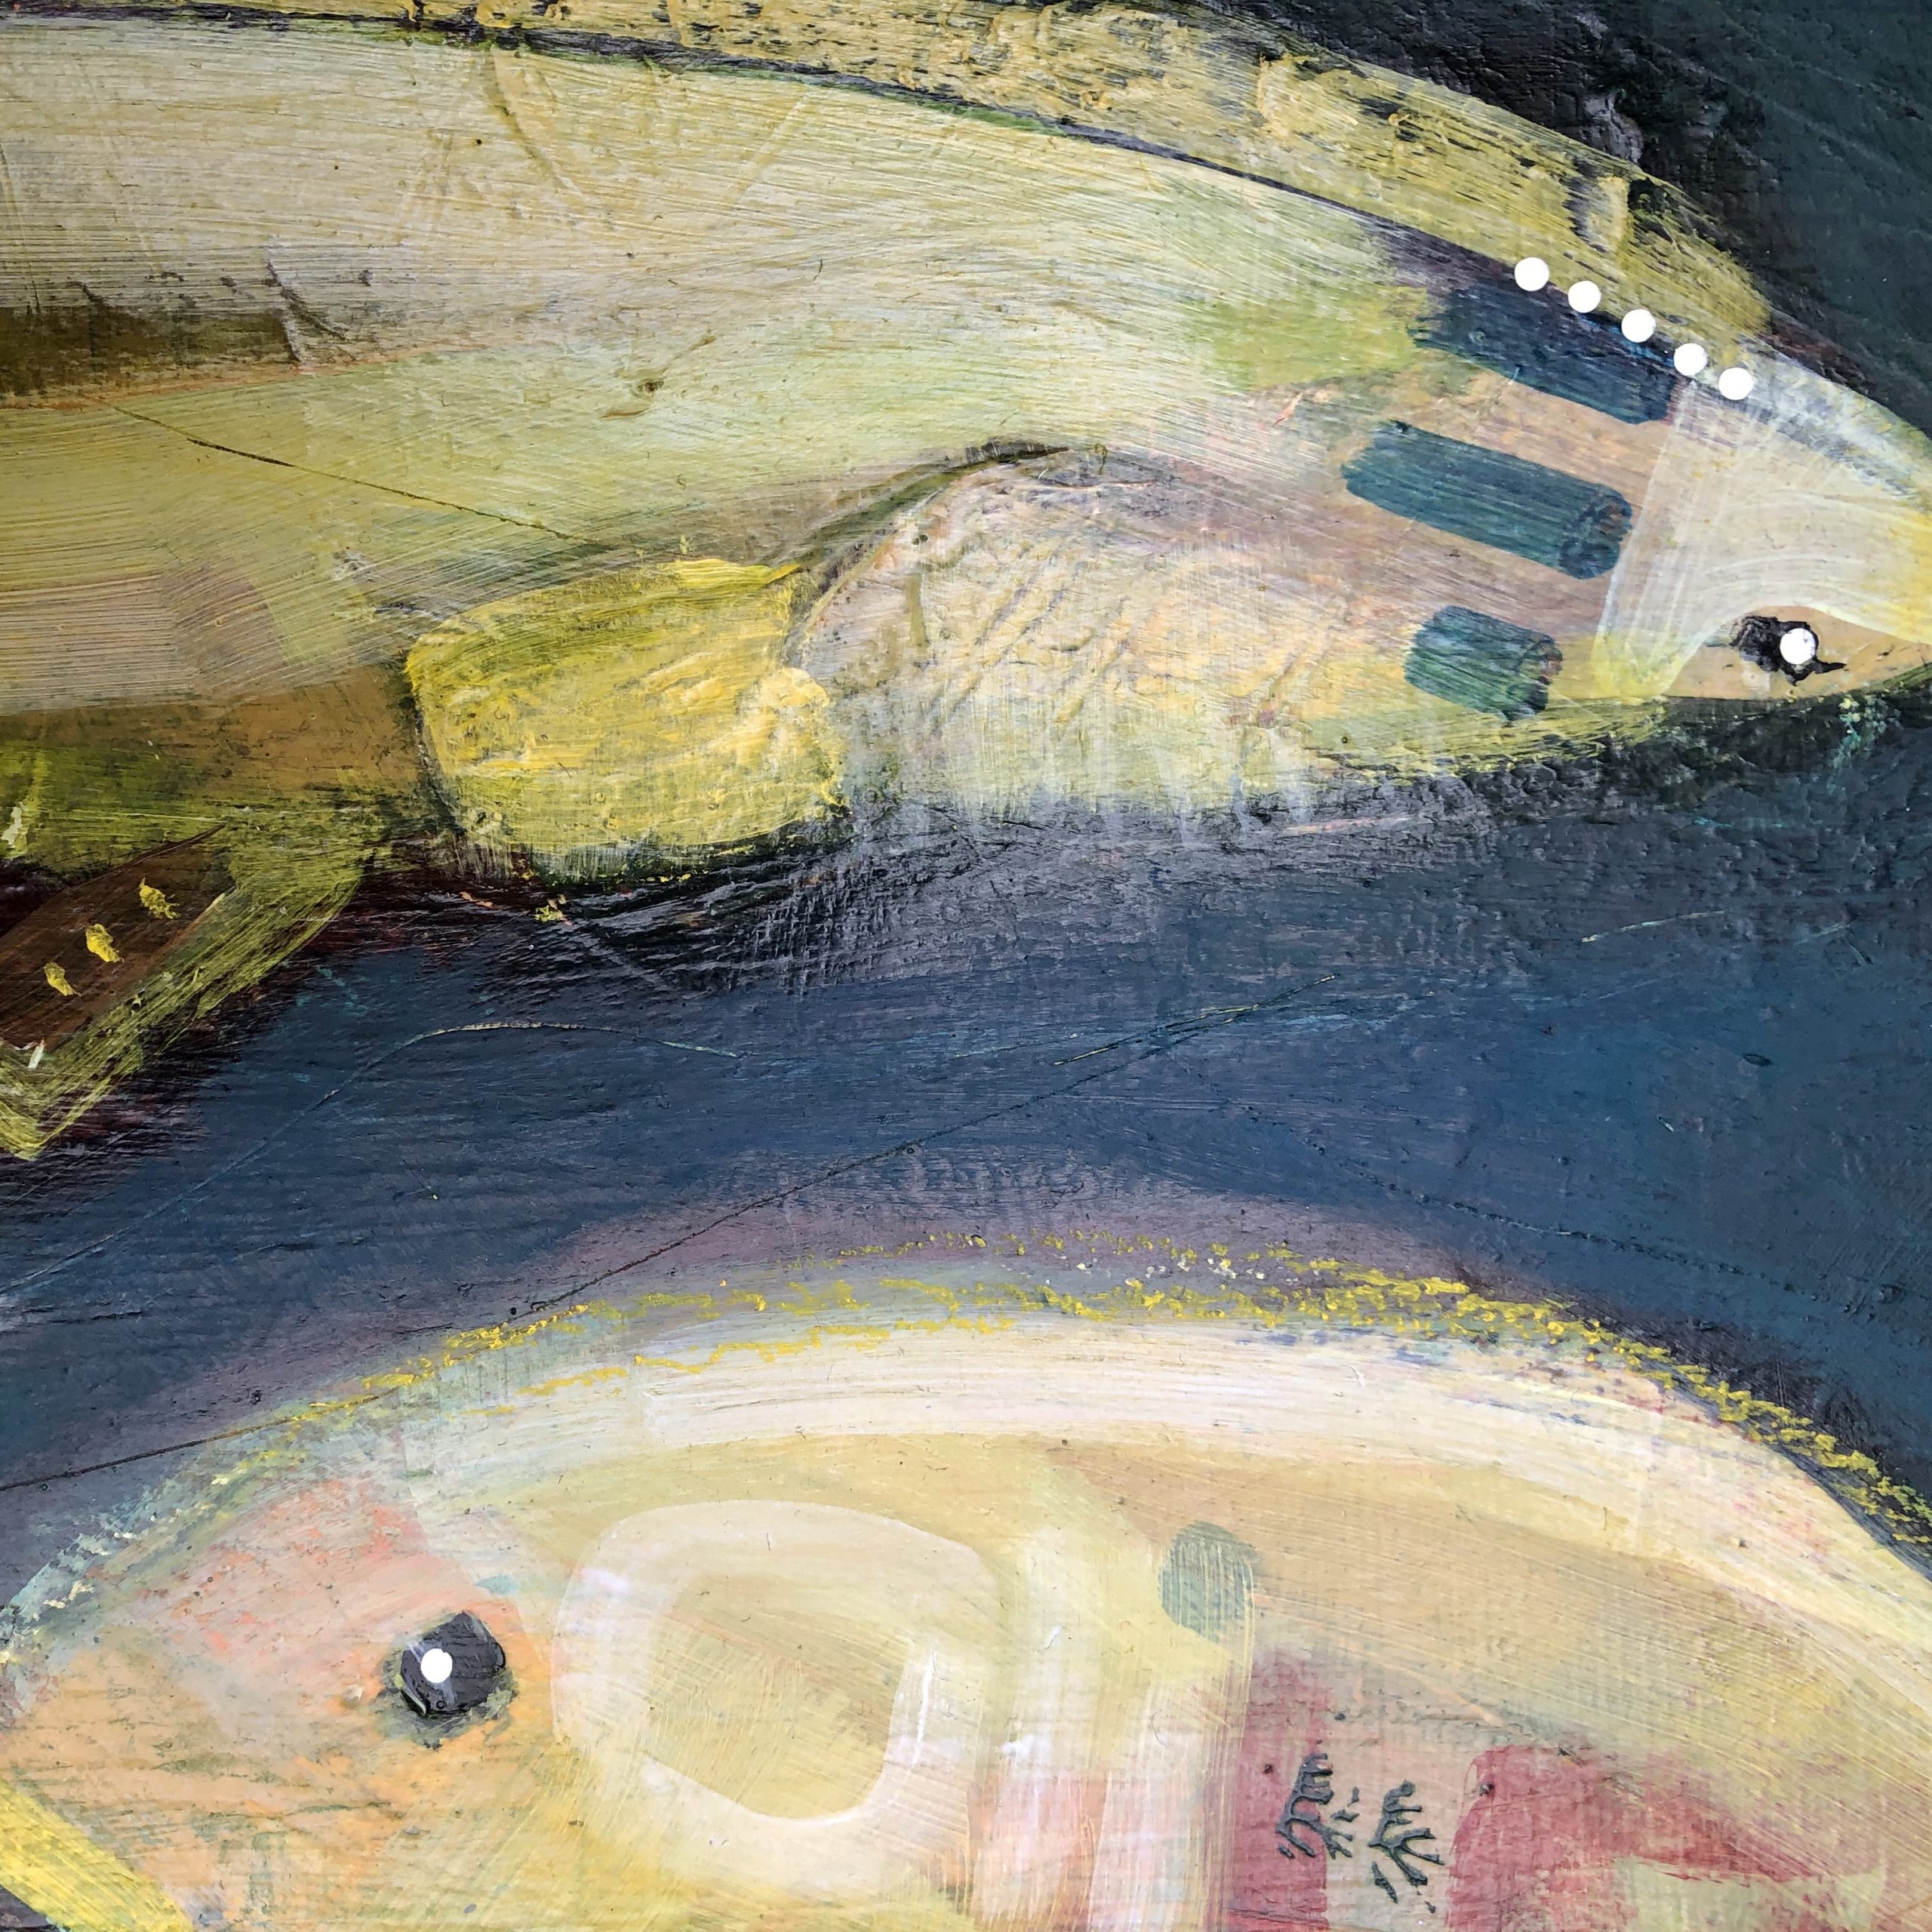 The North Sea II - 40 x 40 cm - Mixed Media on Board - £340 - abstract fish painting Chrissie Richards